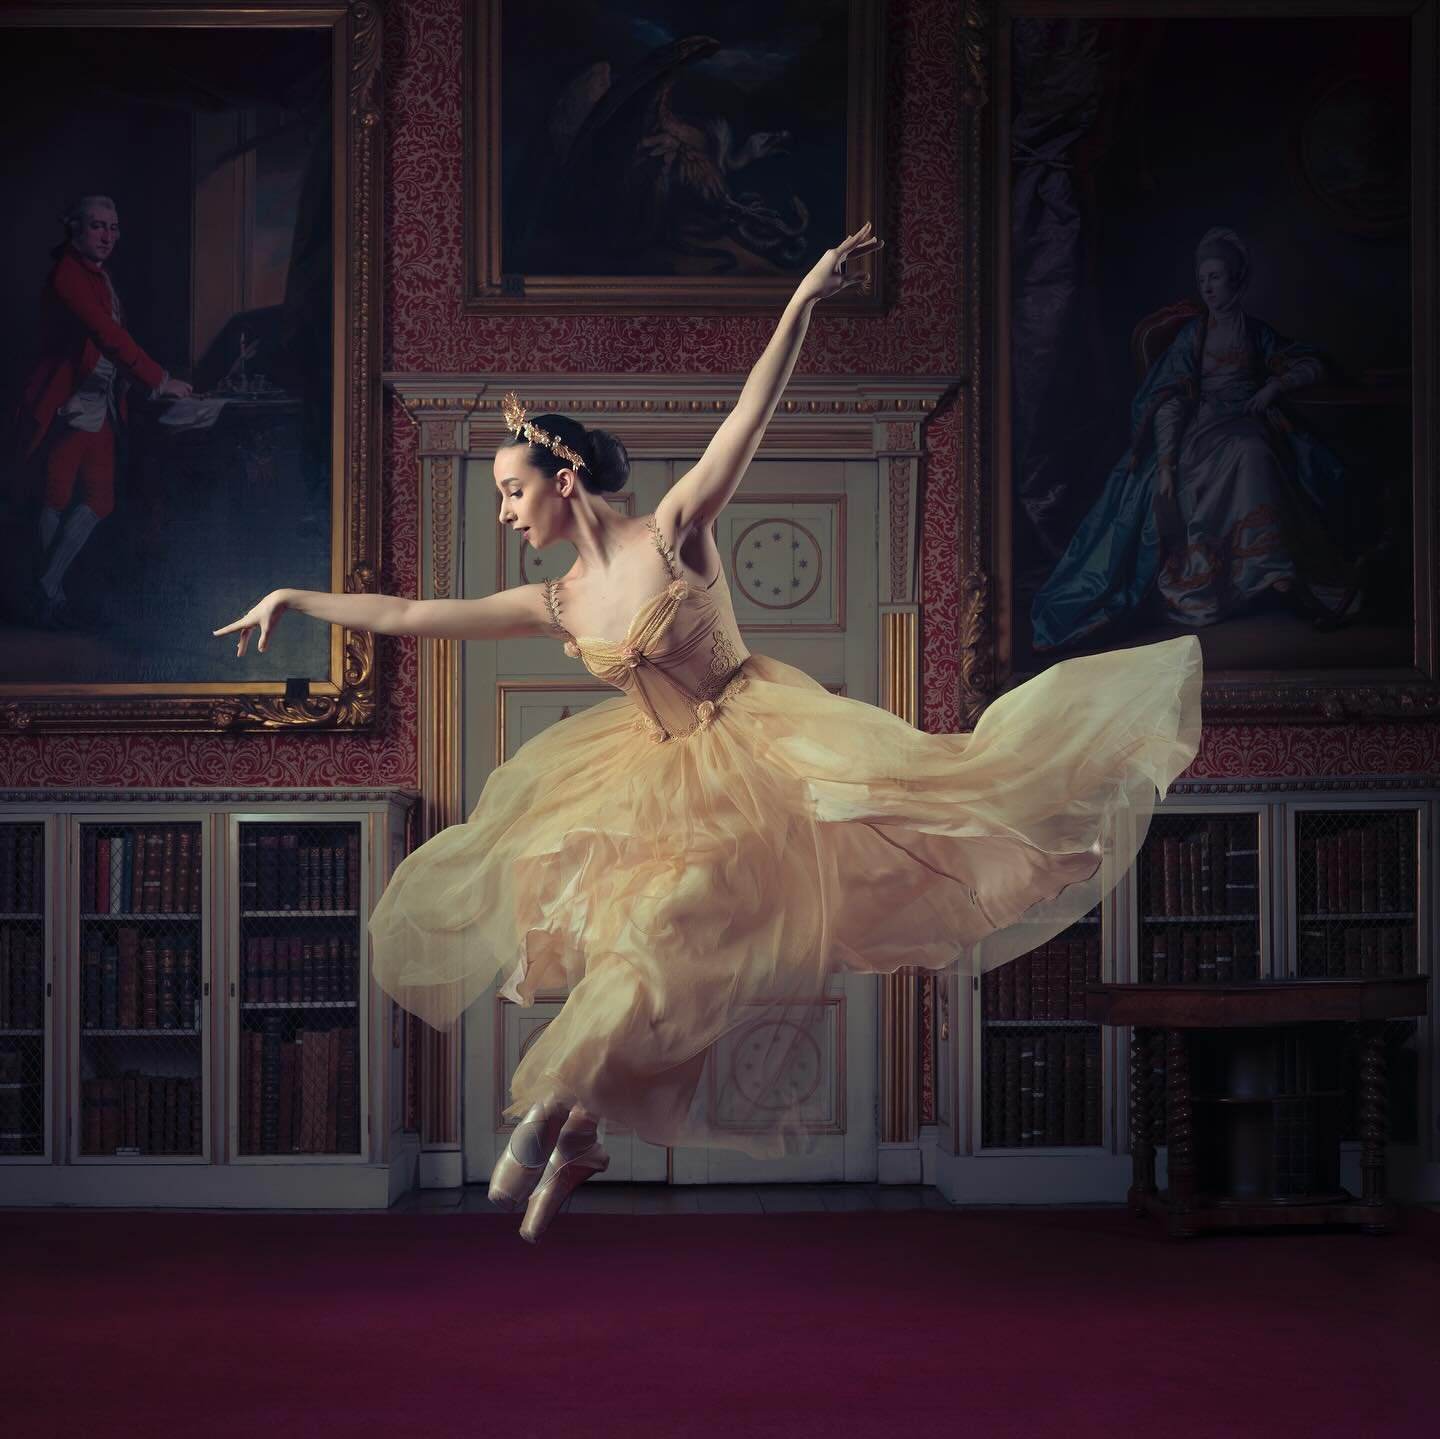 Ballet dancer portraits taken recently at Tabley House in Cheshire, many thanks to dancers Erica, Dan and Nova who were able to create amazing shapes whilst leaping in mid air. Styling by Tabitha Boydell.

#balletportrait #dancephotography #dancerpor